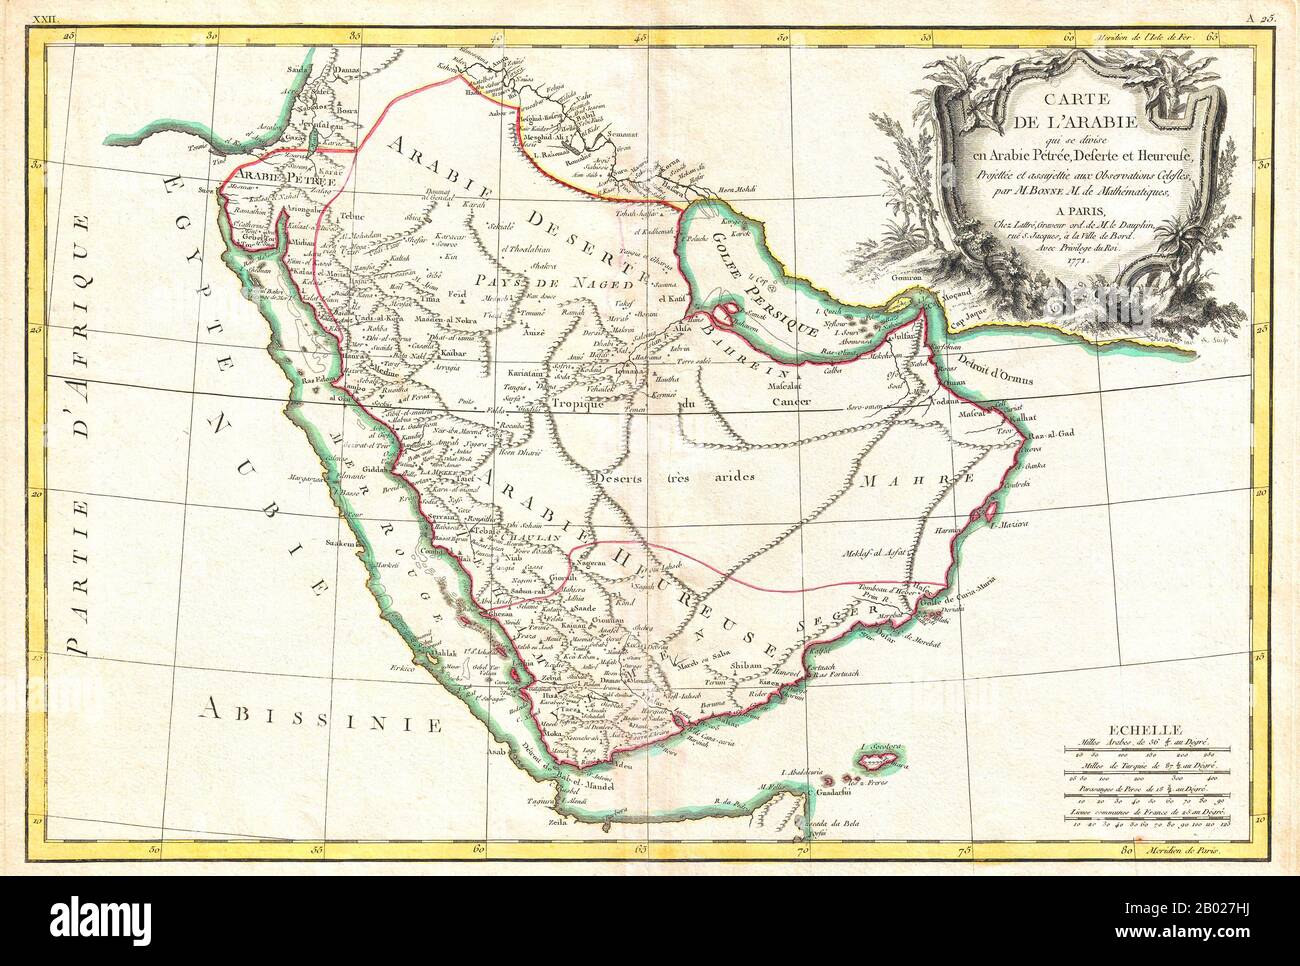 Rigobert Bonne's 1771 decorative map of the Arabian Peninsula. Covers from the Mediterranean to the Indian Ocean and from the Red Sea to the Persian Gulf. Includes the modern day nations of Saudi Arabia, Israel, Jordan, Kuwait, Iraq, Yemen, Oman, the United Arab Emirates, and Bahrain.  It names Mt. Sinai, Mecca and Jerusalem as well as many other cities and desert oases and also notes numerous offshore shoals, reefs, and other dangers in the Red Sea and the Persian Gulf. There is a large decorative title cartouche in the upper right hand quadrant. Drawn by R. Bonne in 1771 for issue as plate n Stock Photo